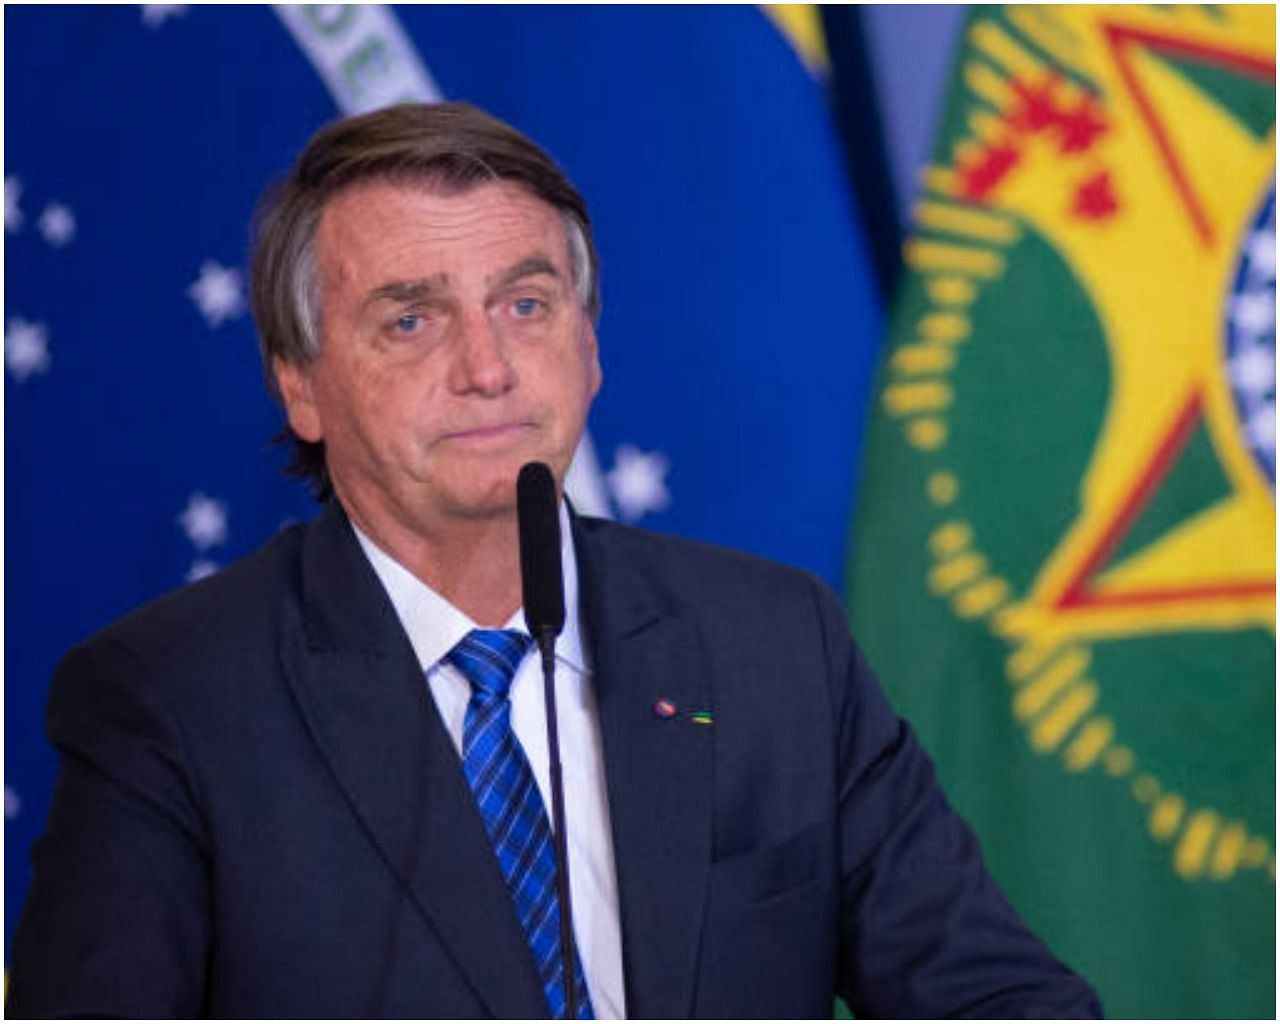 President Jair Bolsonaro assured that he would look into the matter (Image via Getty)